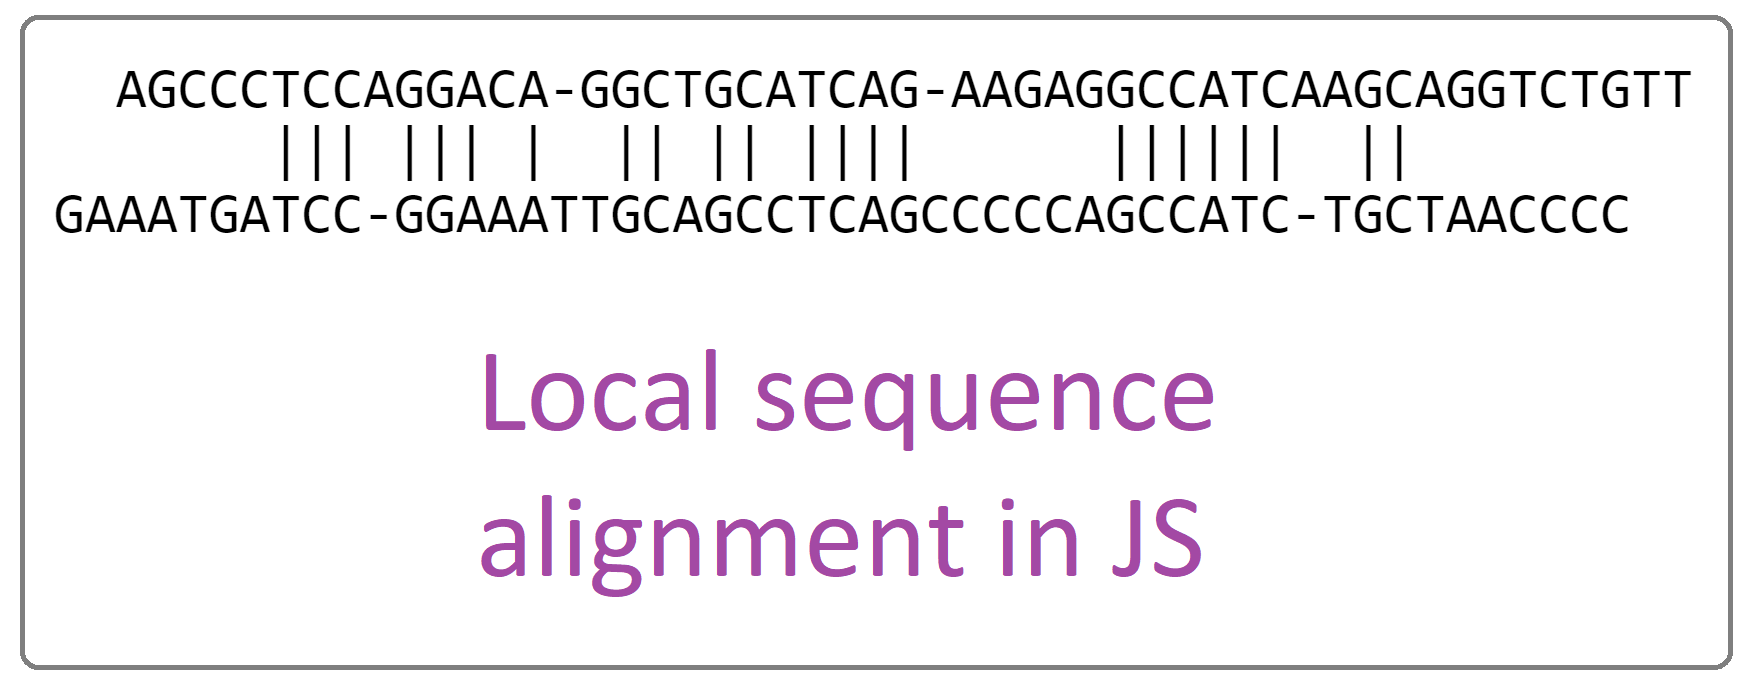 Local-sequence-alignment-in-JS